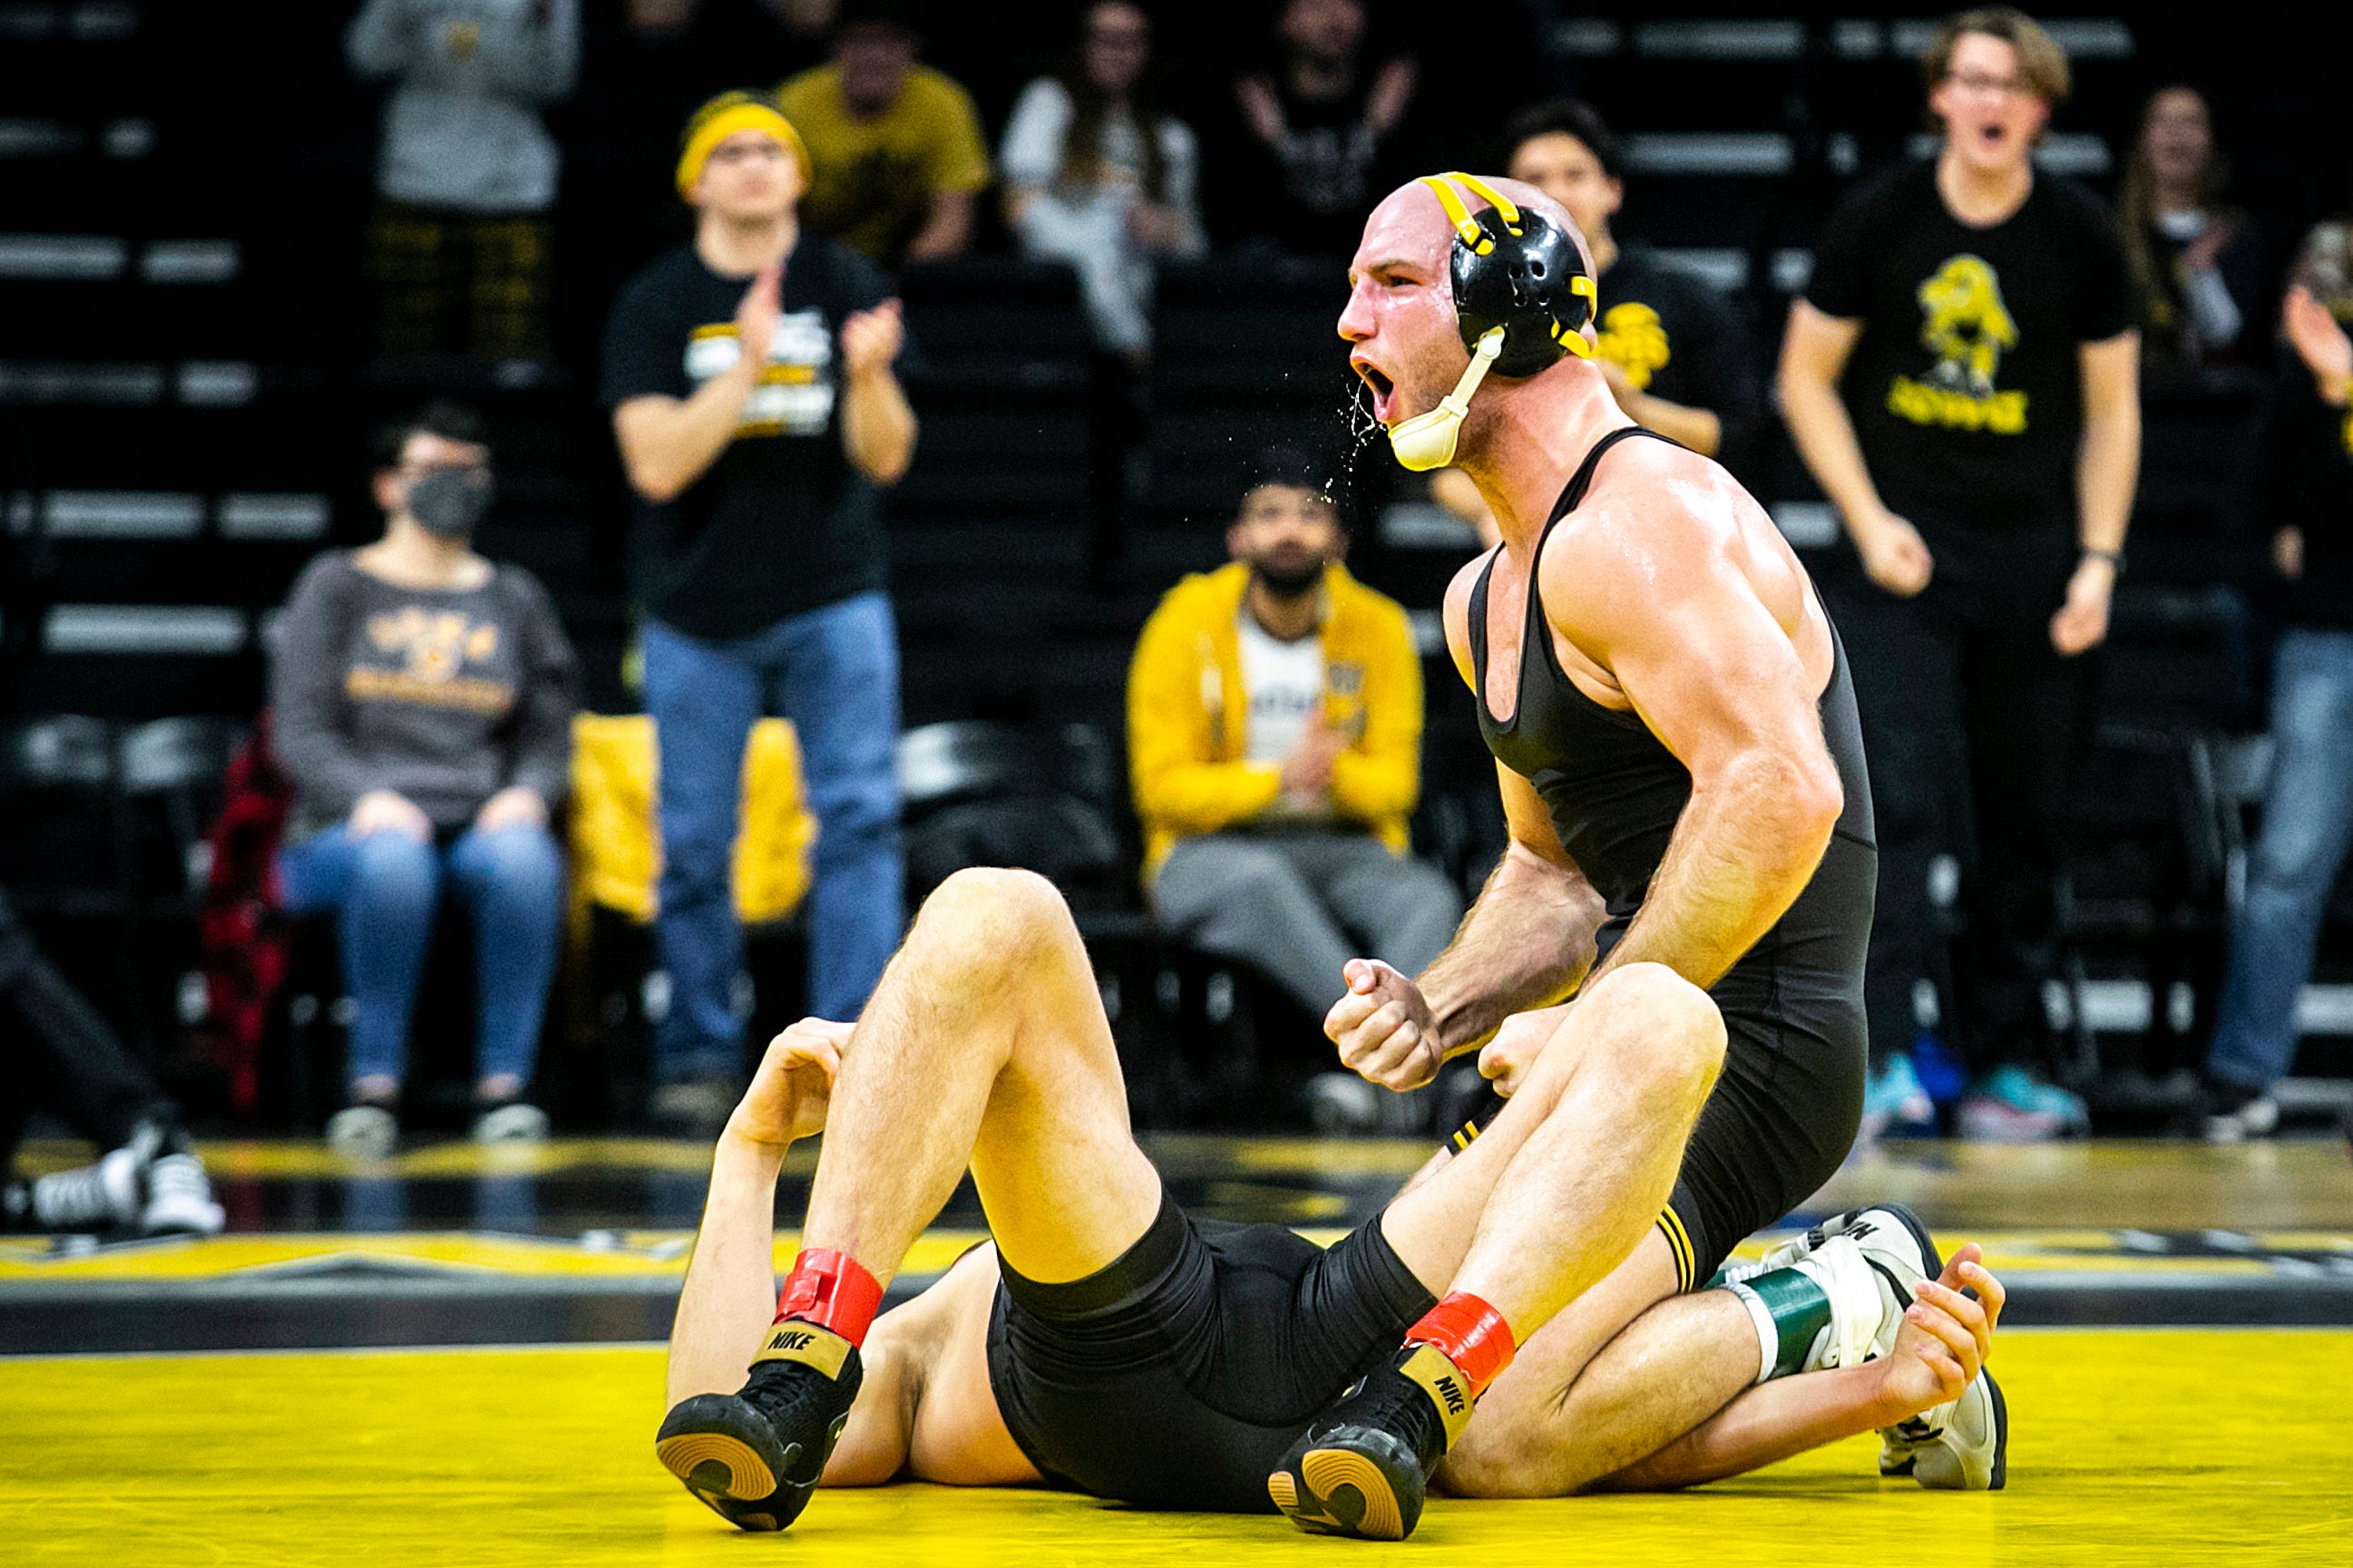 Iowa wrestling's 202223 schedule is out. Here are the key dates.